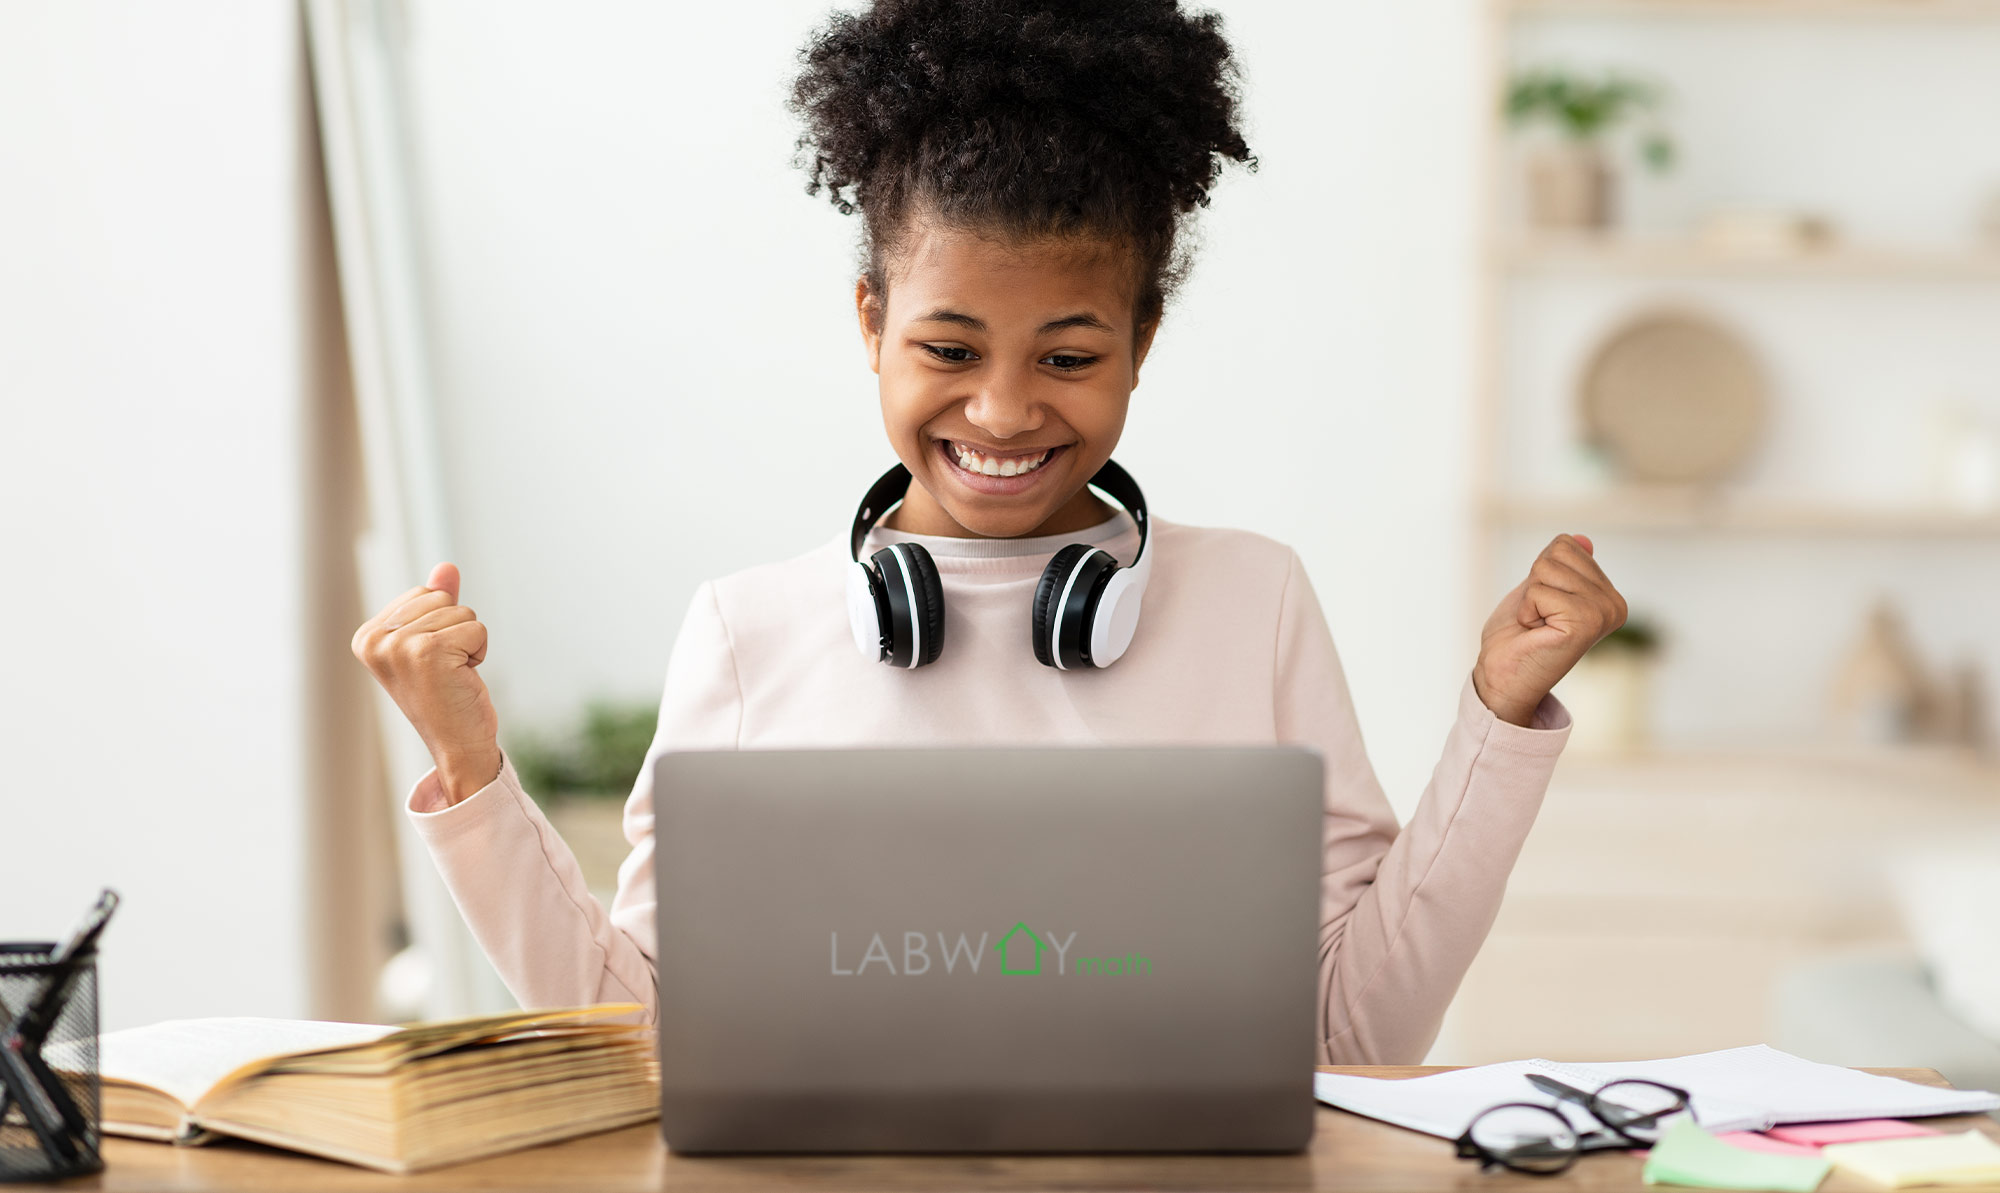 a young girl wearing headphones around her neck and an excited look on her face sits at a laptop with the the LABWAYmath logo on the back of the display screen